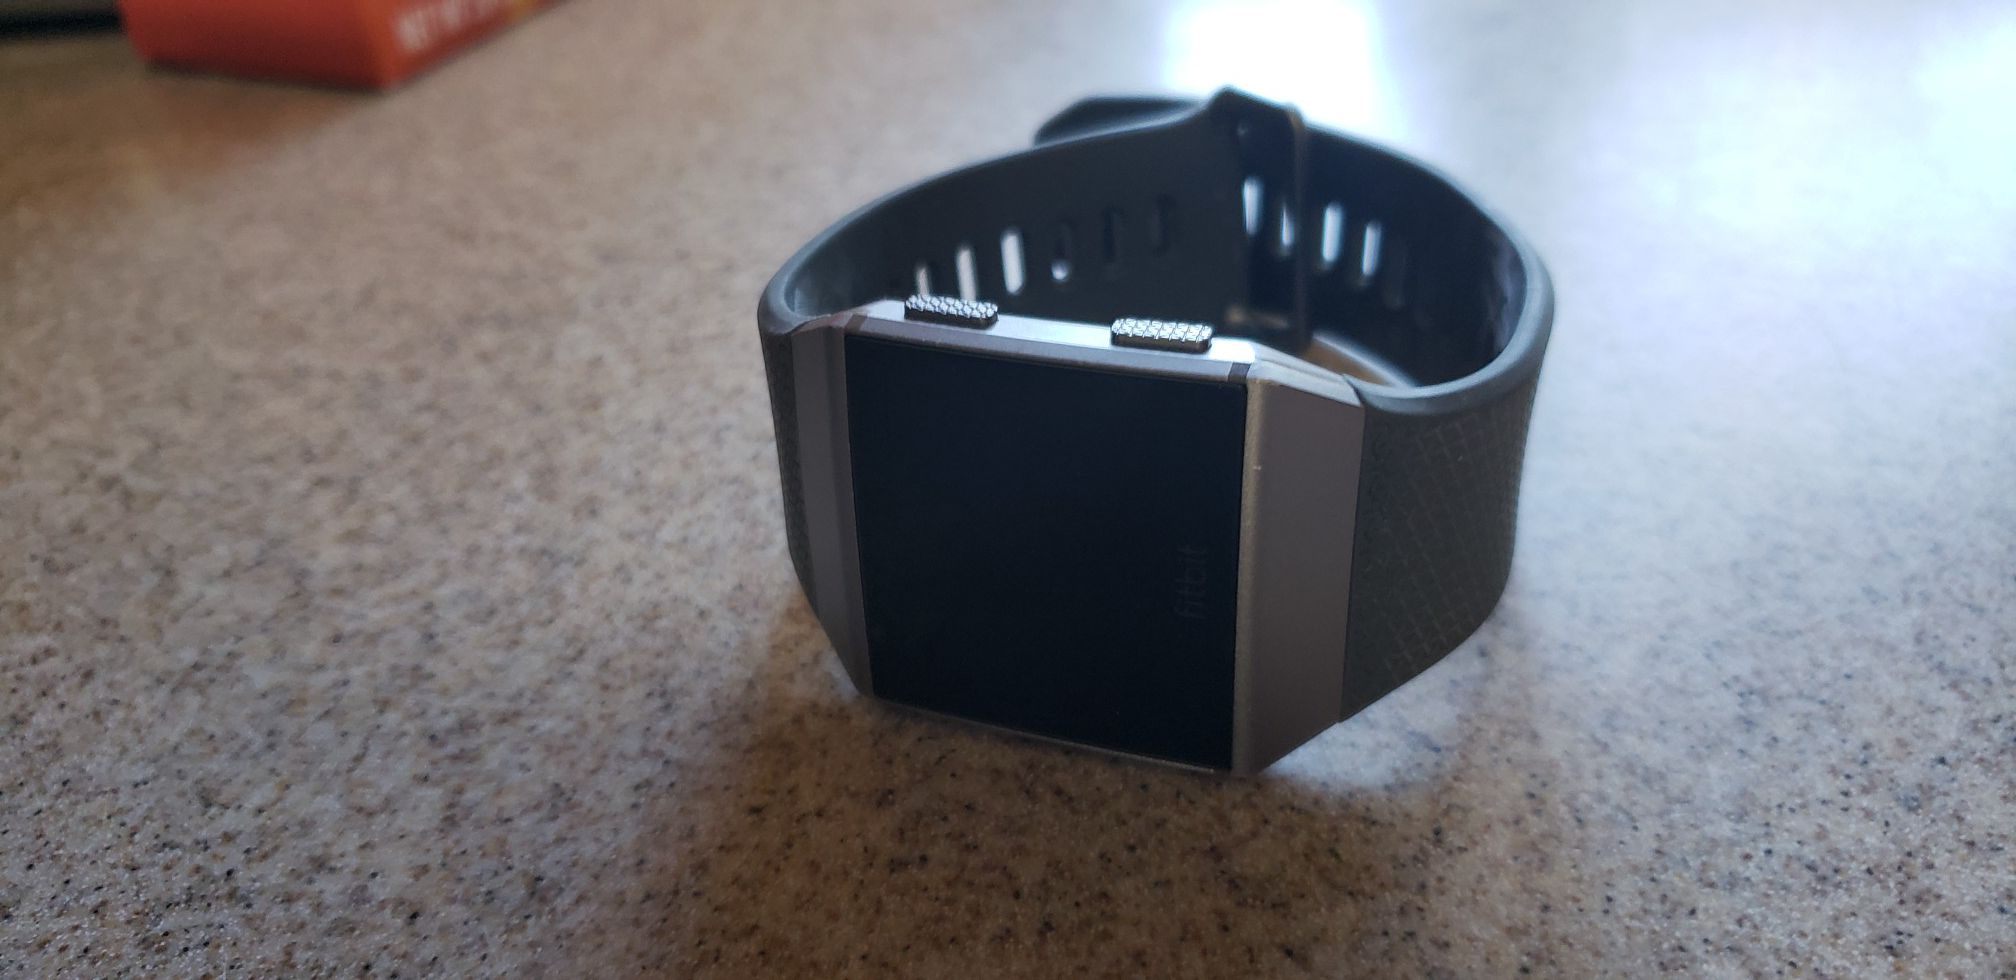 Fitbit Ionic. Charger not included